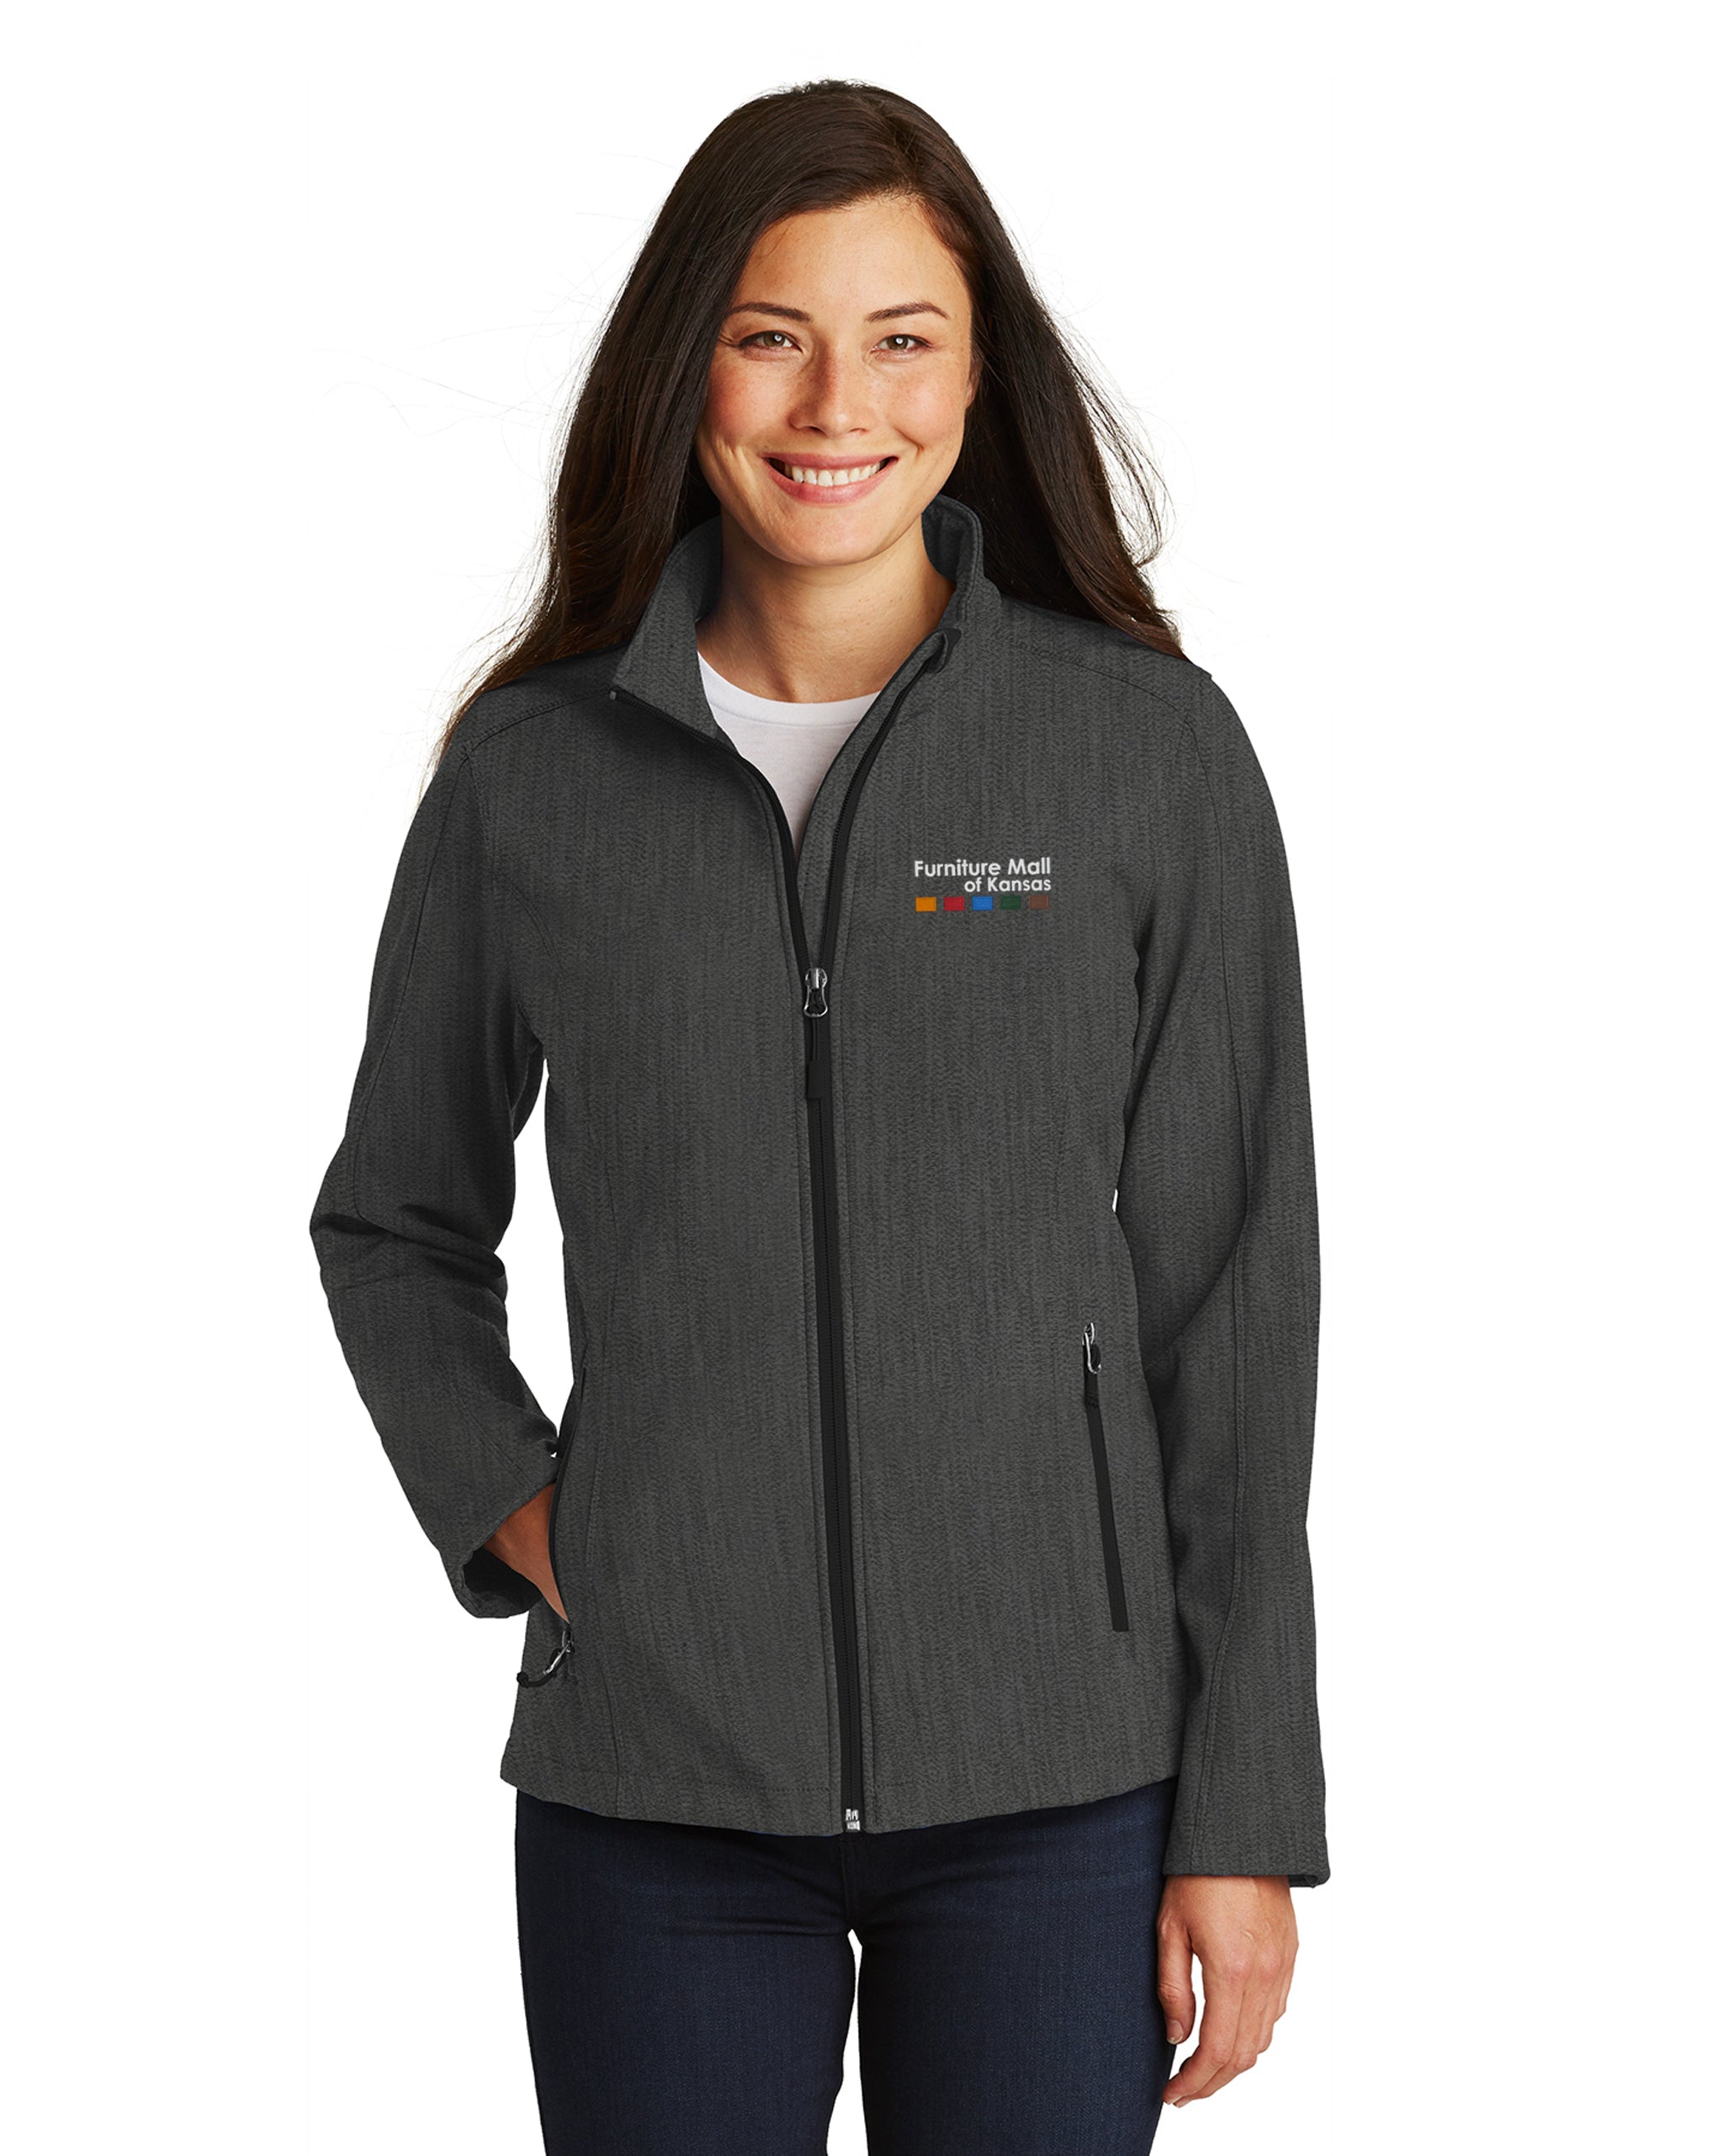 Furniture Mall of Kansas - Port Authority Ladies Core Soft Shell Jacket - L317